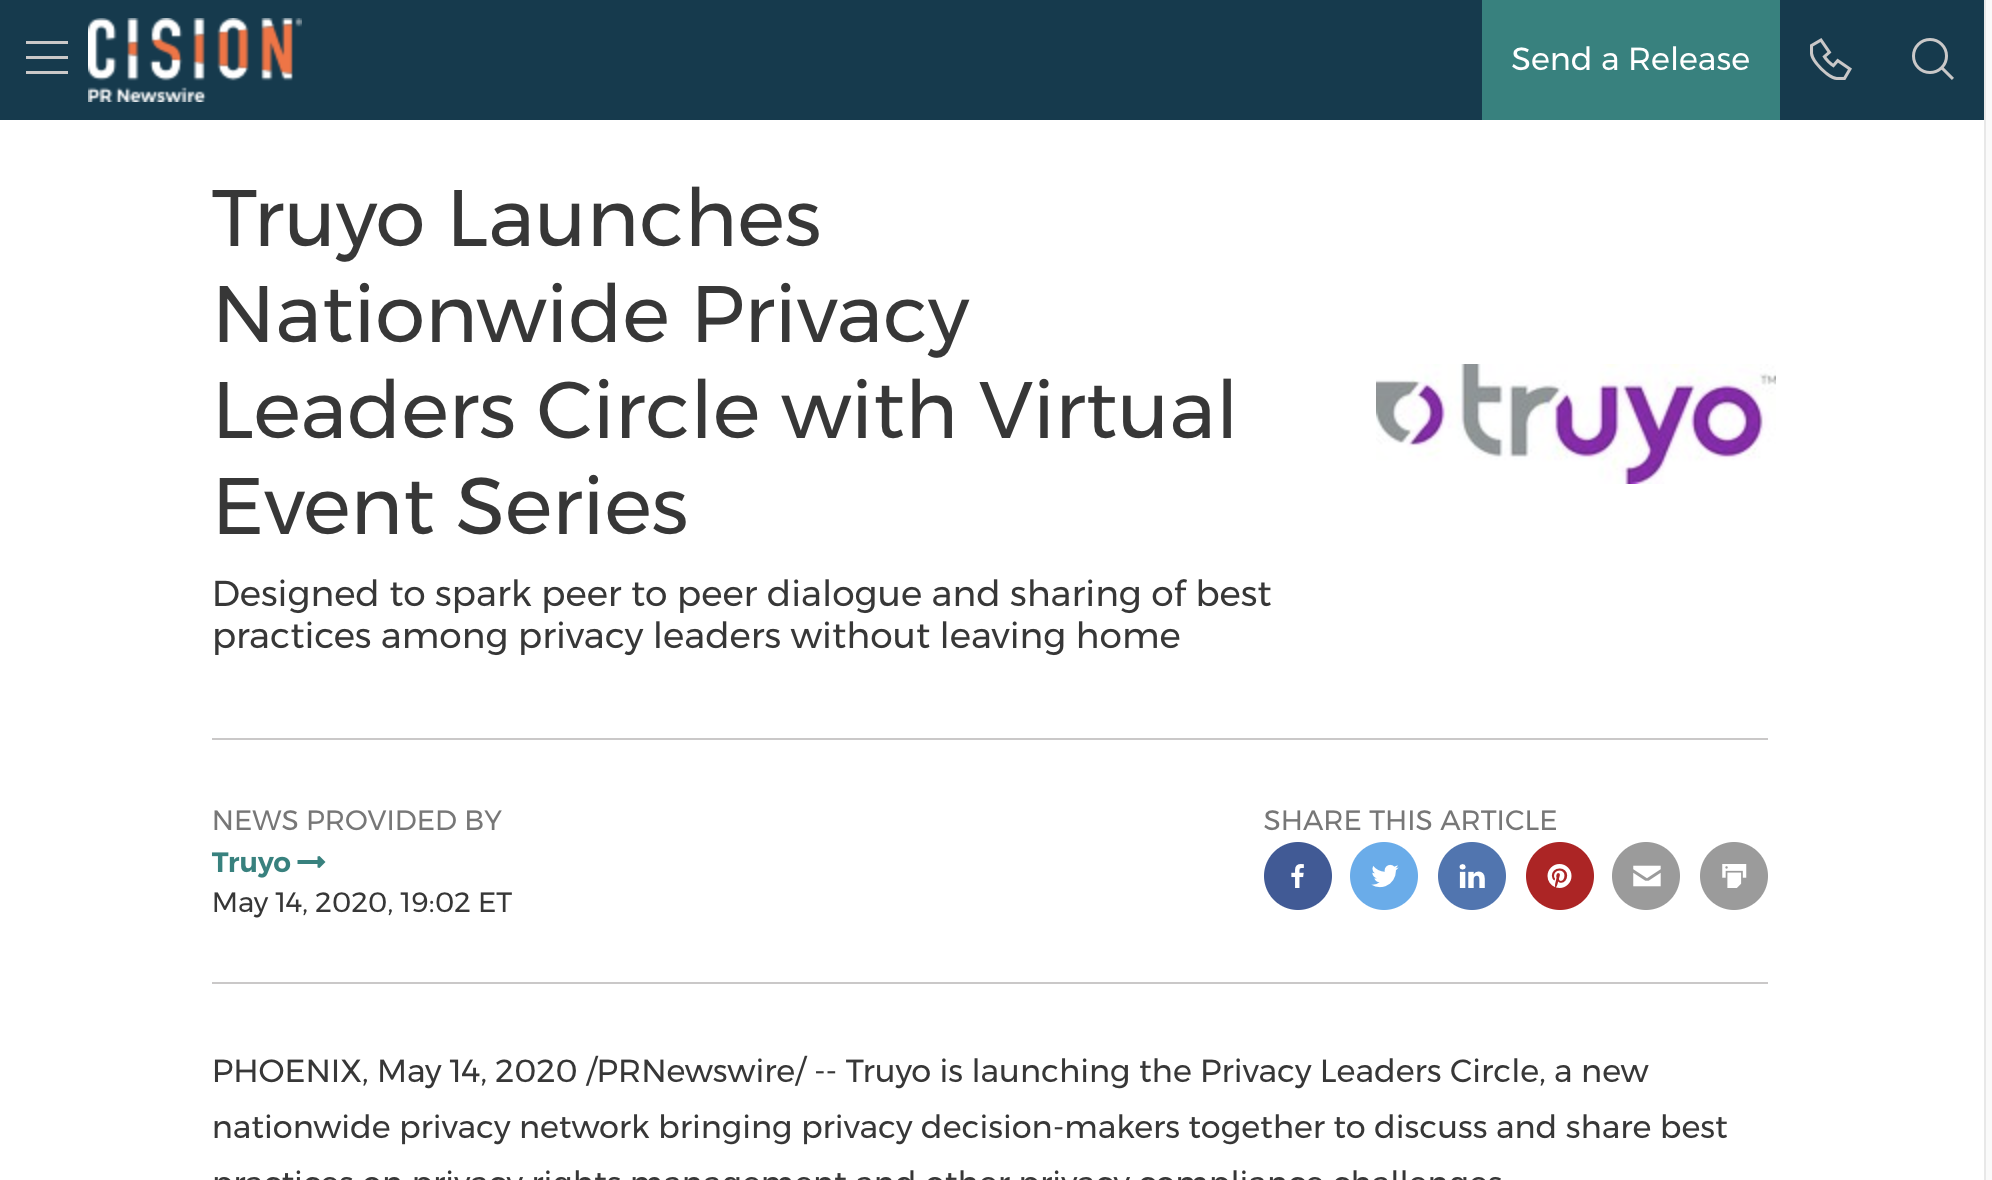 Truyo Launches Nationwide Privacy Leaders Circle